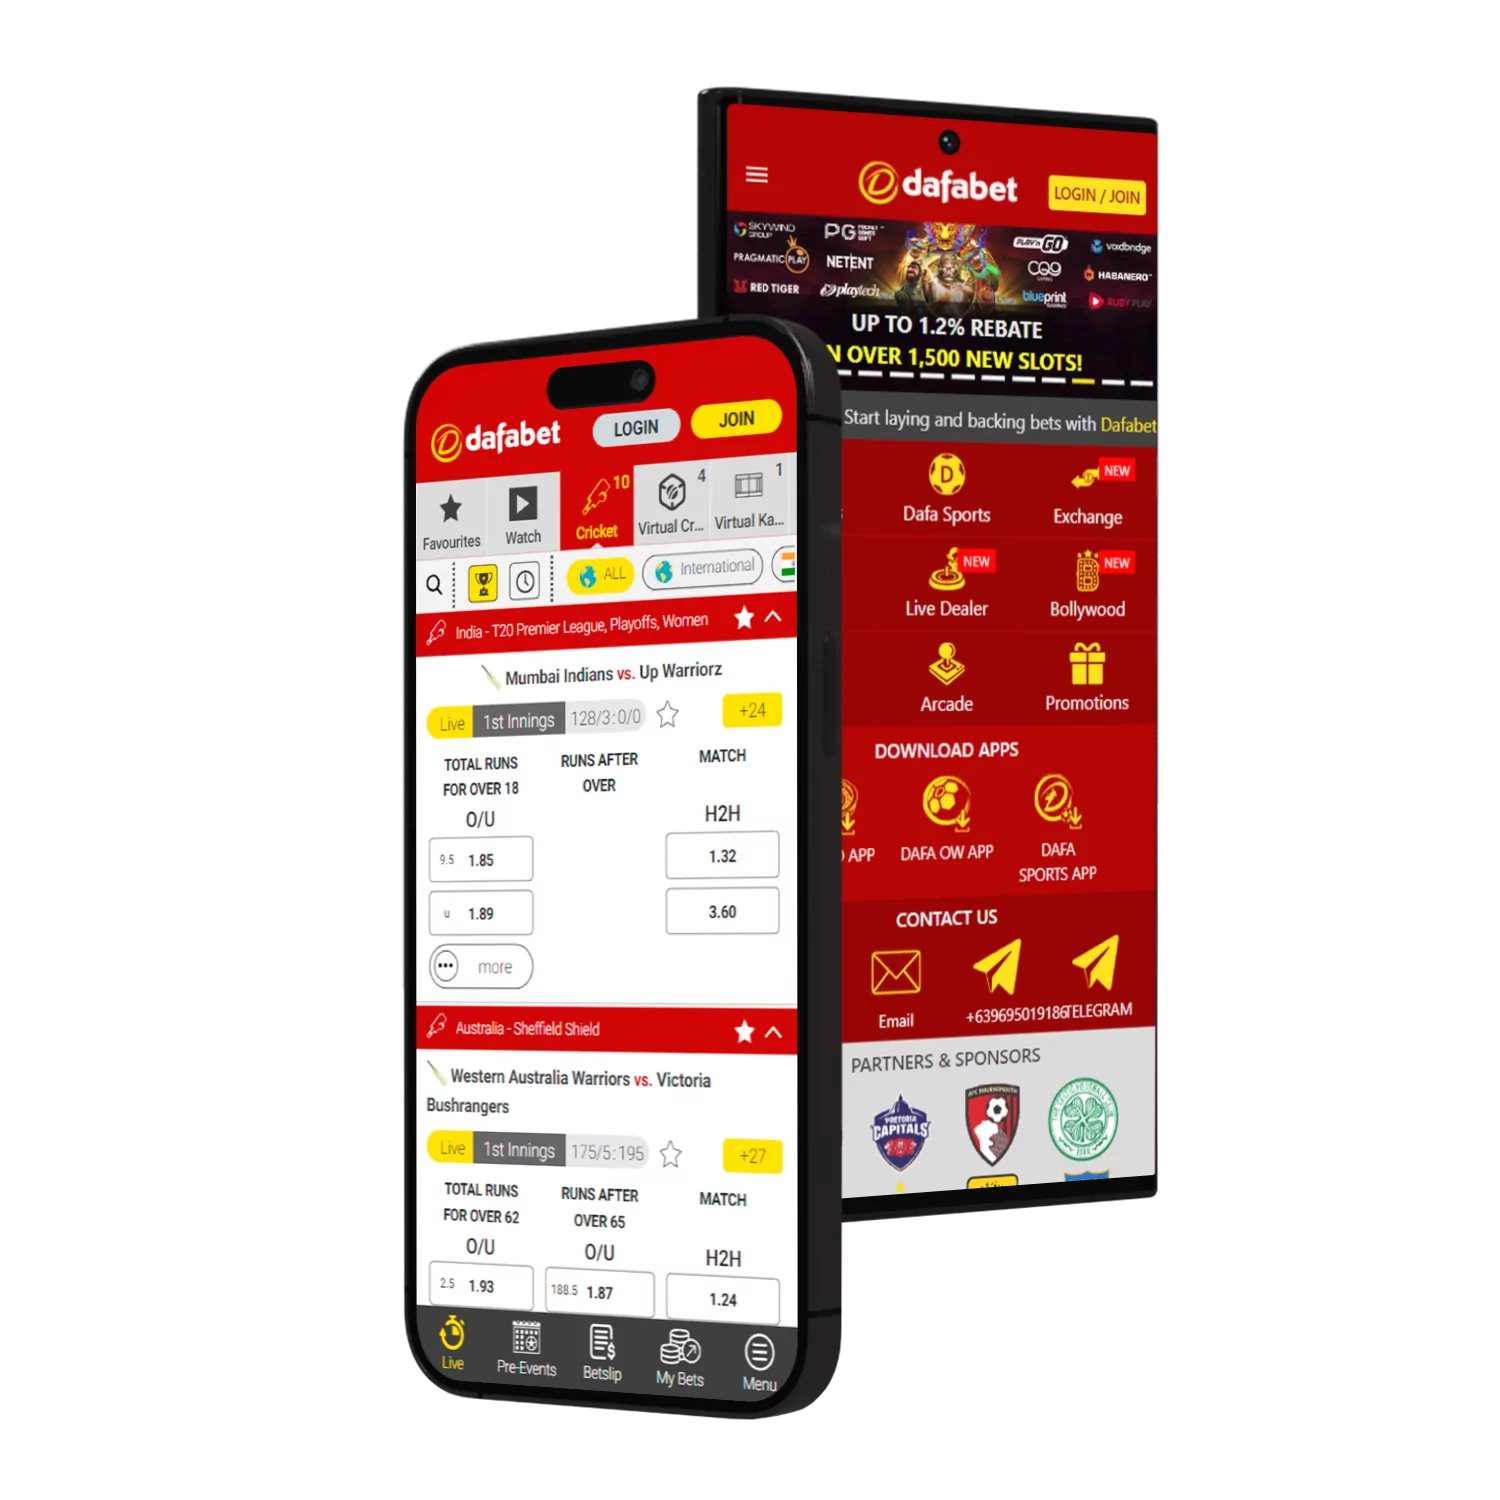 You can place bets and win real money in the Dafabet app.